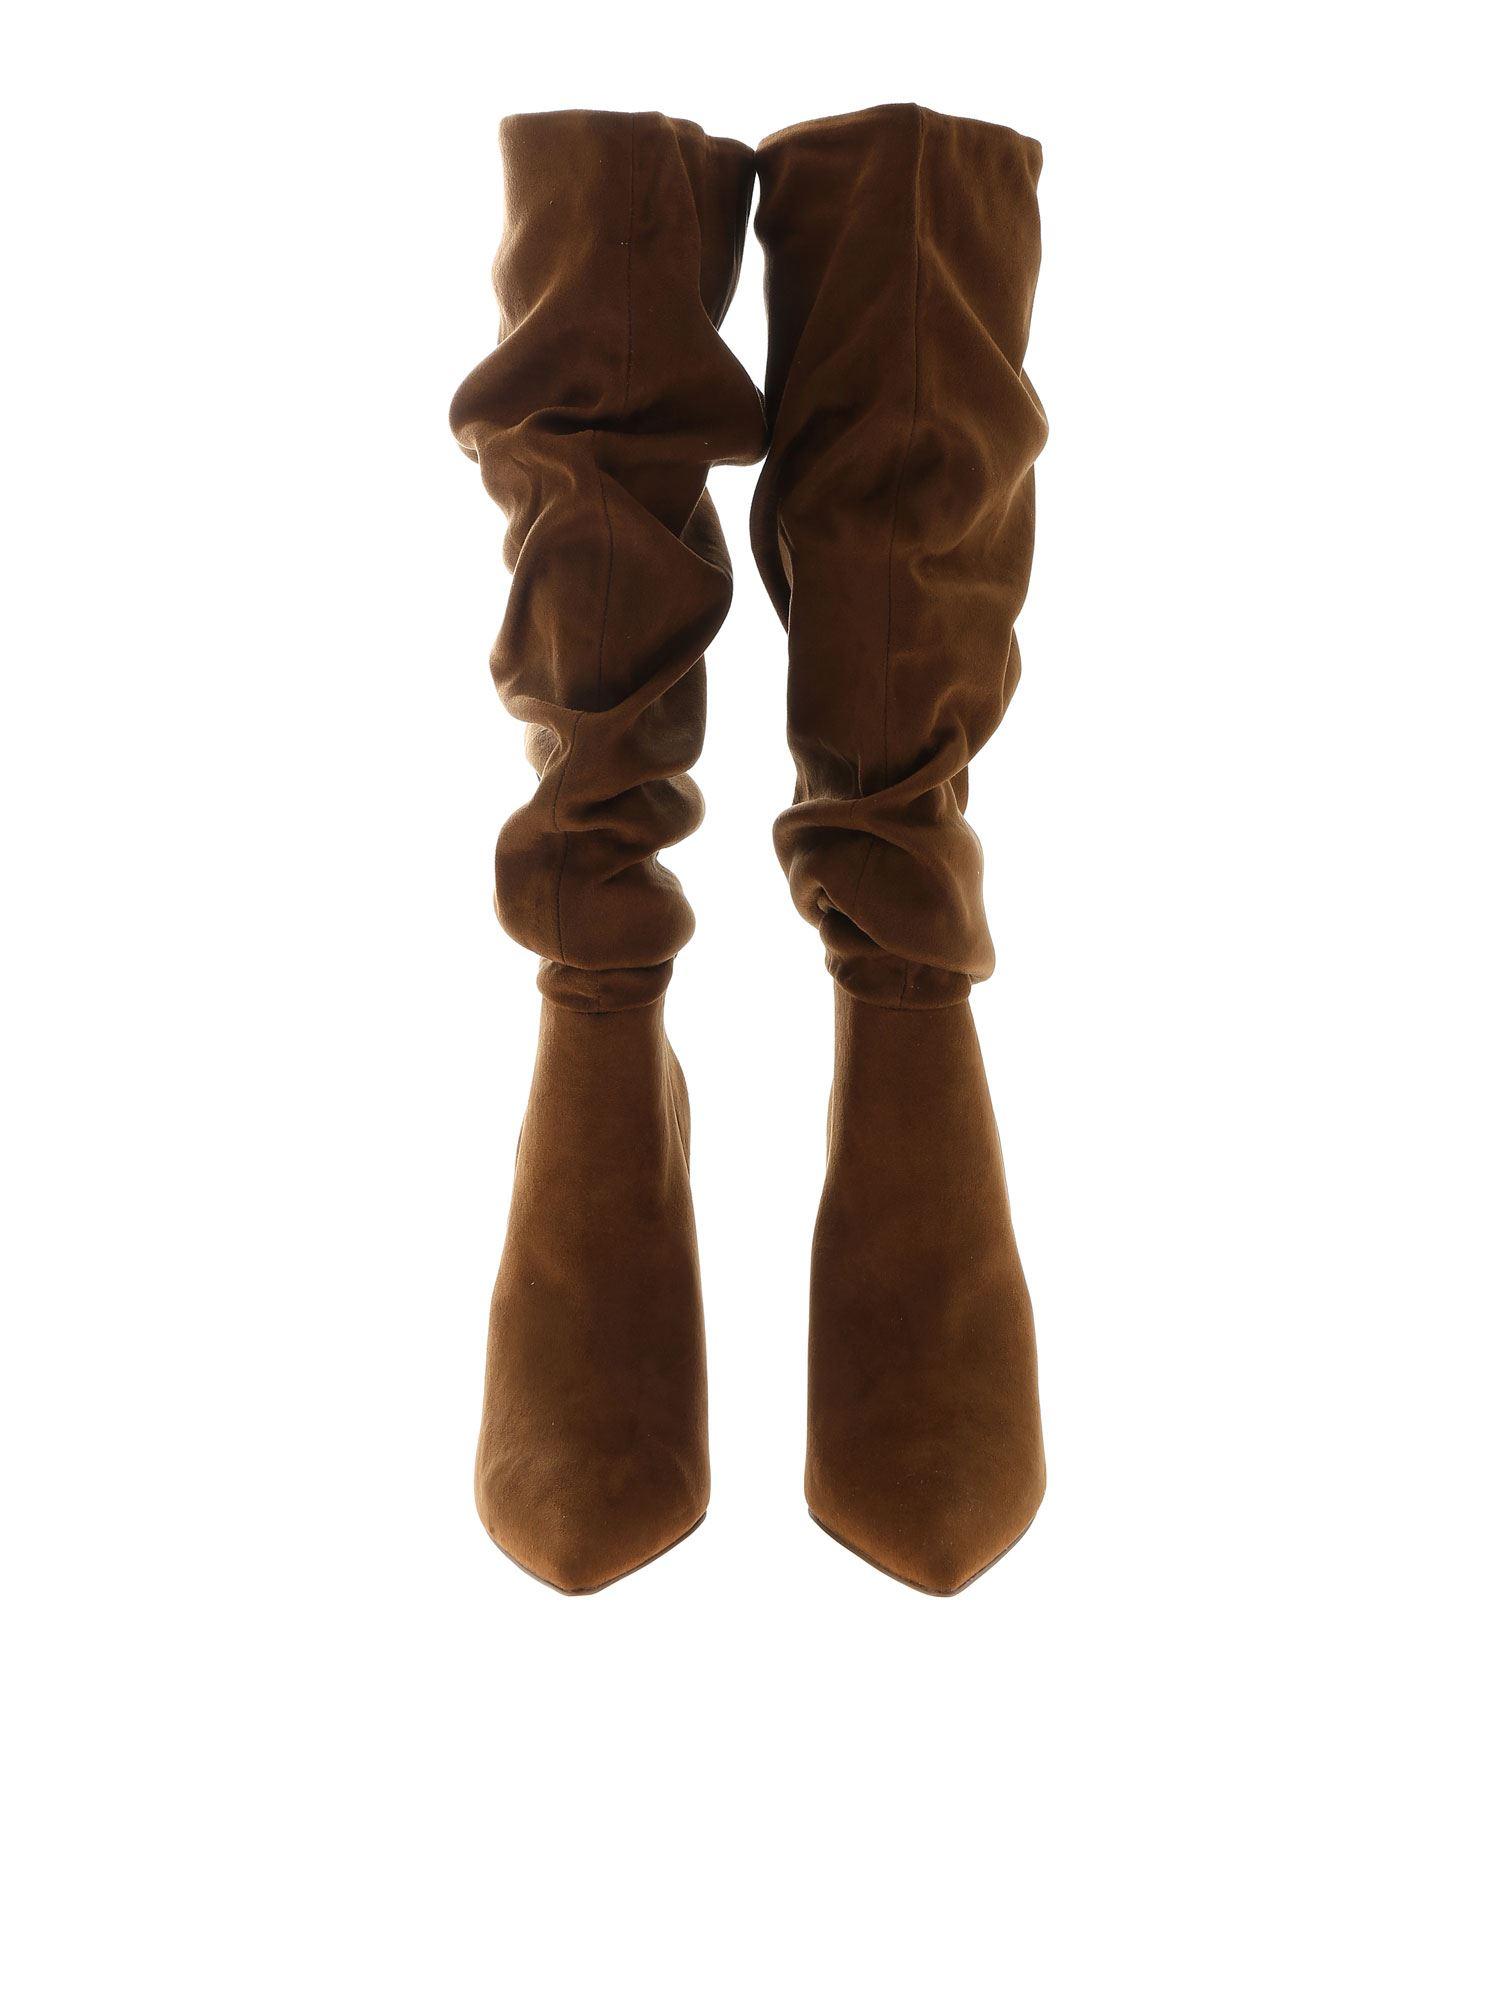 Steve Madden Slouch Boots in Brown - Lyst